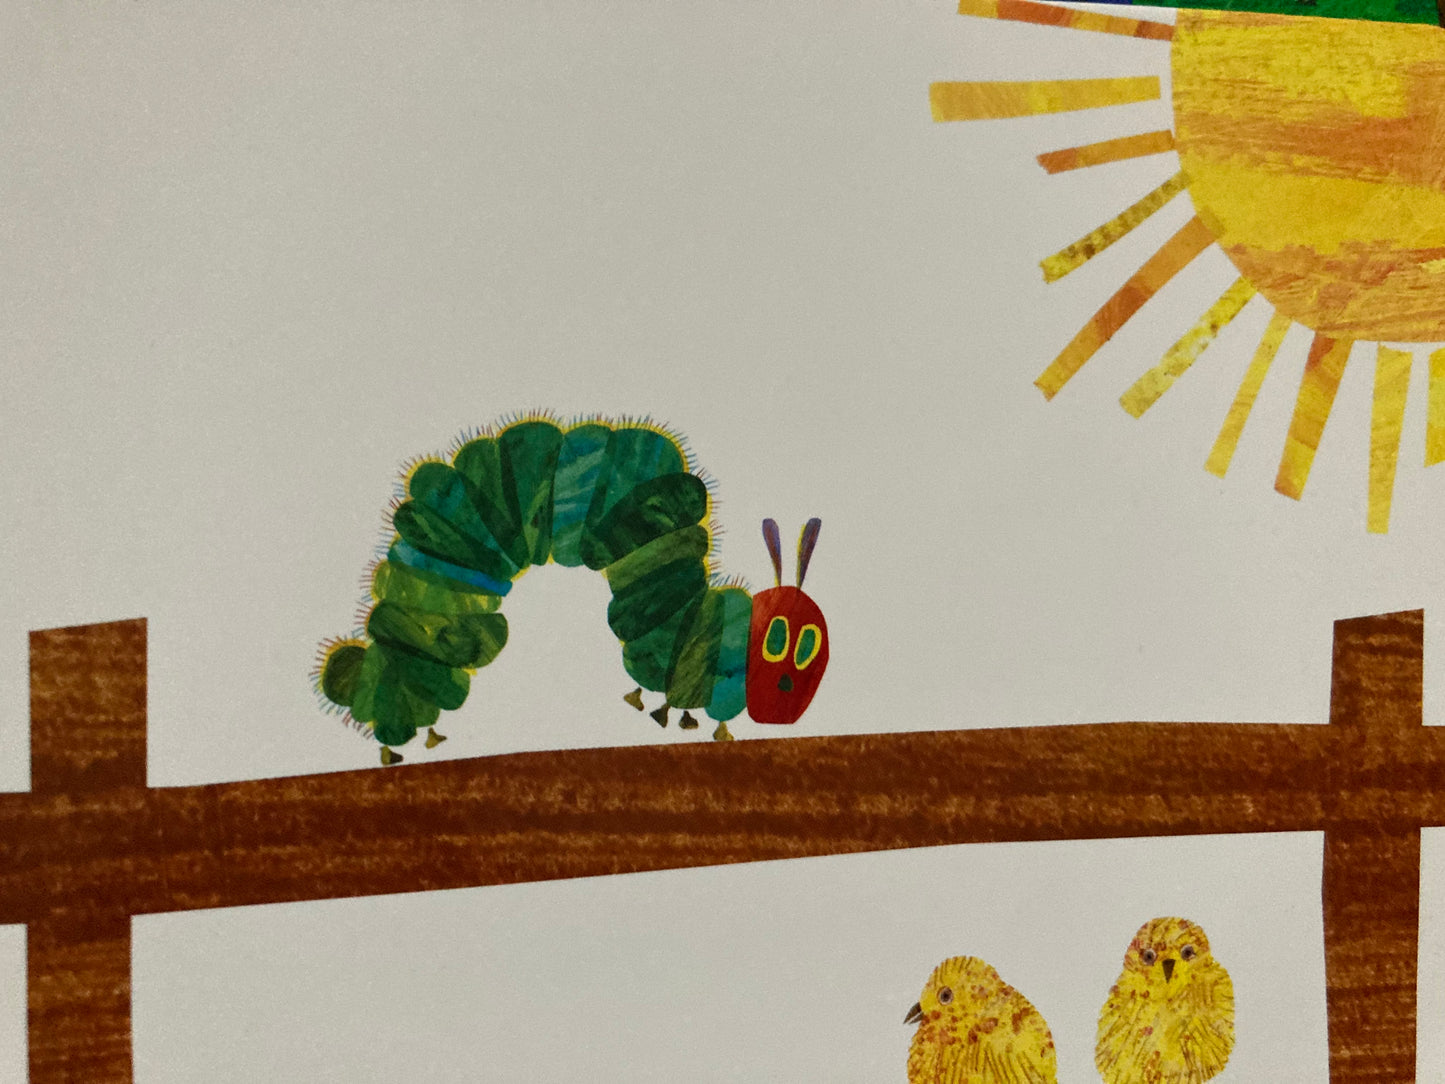 Board Book, Baby - A DAY ON THE FARM with the Very Hungry Caterpillar